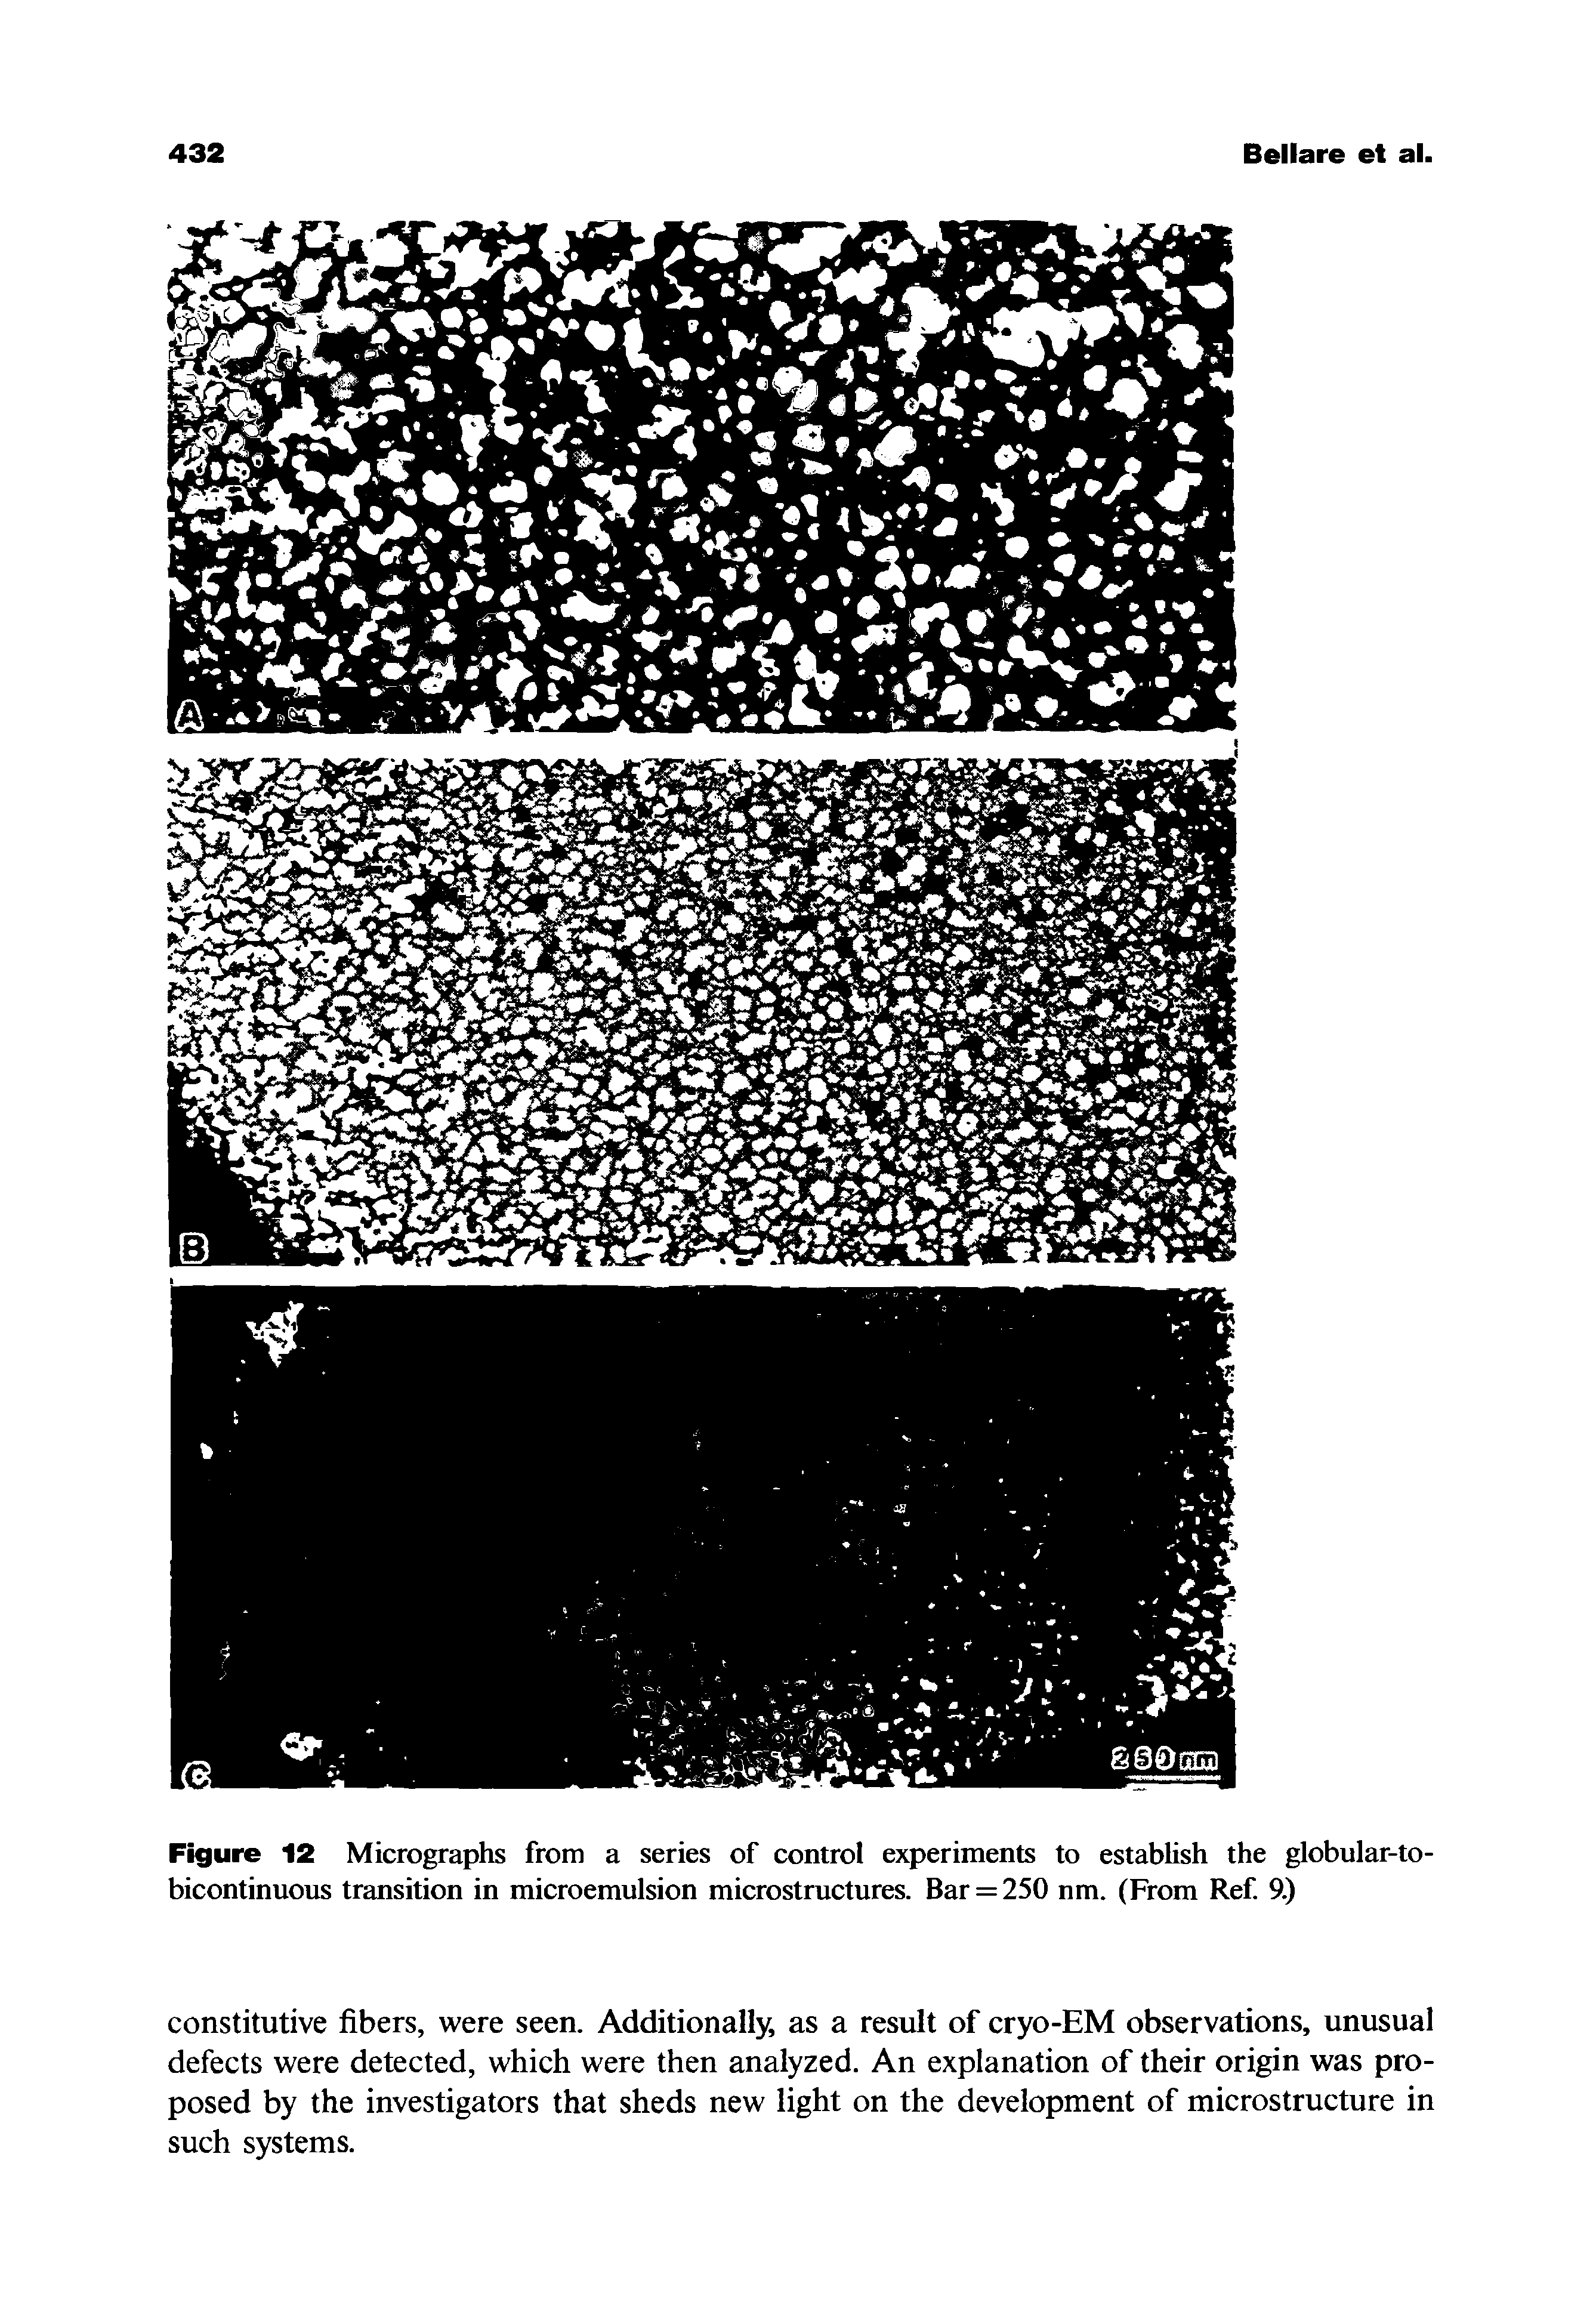 Figure 12 Micrographs from a series of control experiments to establish the globular-to-bicontinuous transition in microemulsion microstructures. Bar = 250 nm. (From Ref 9.)...